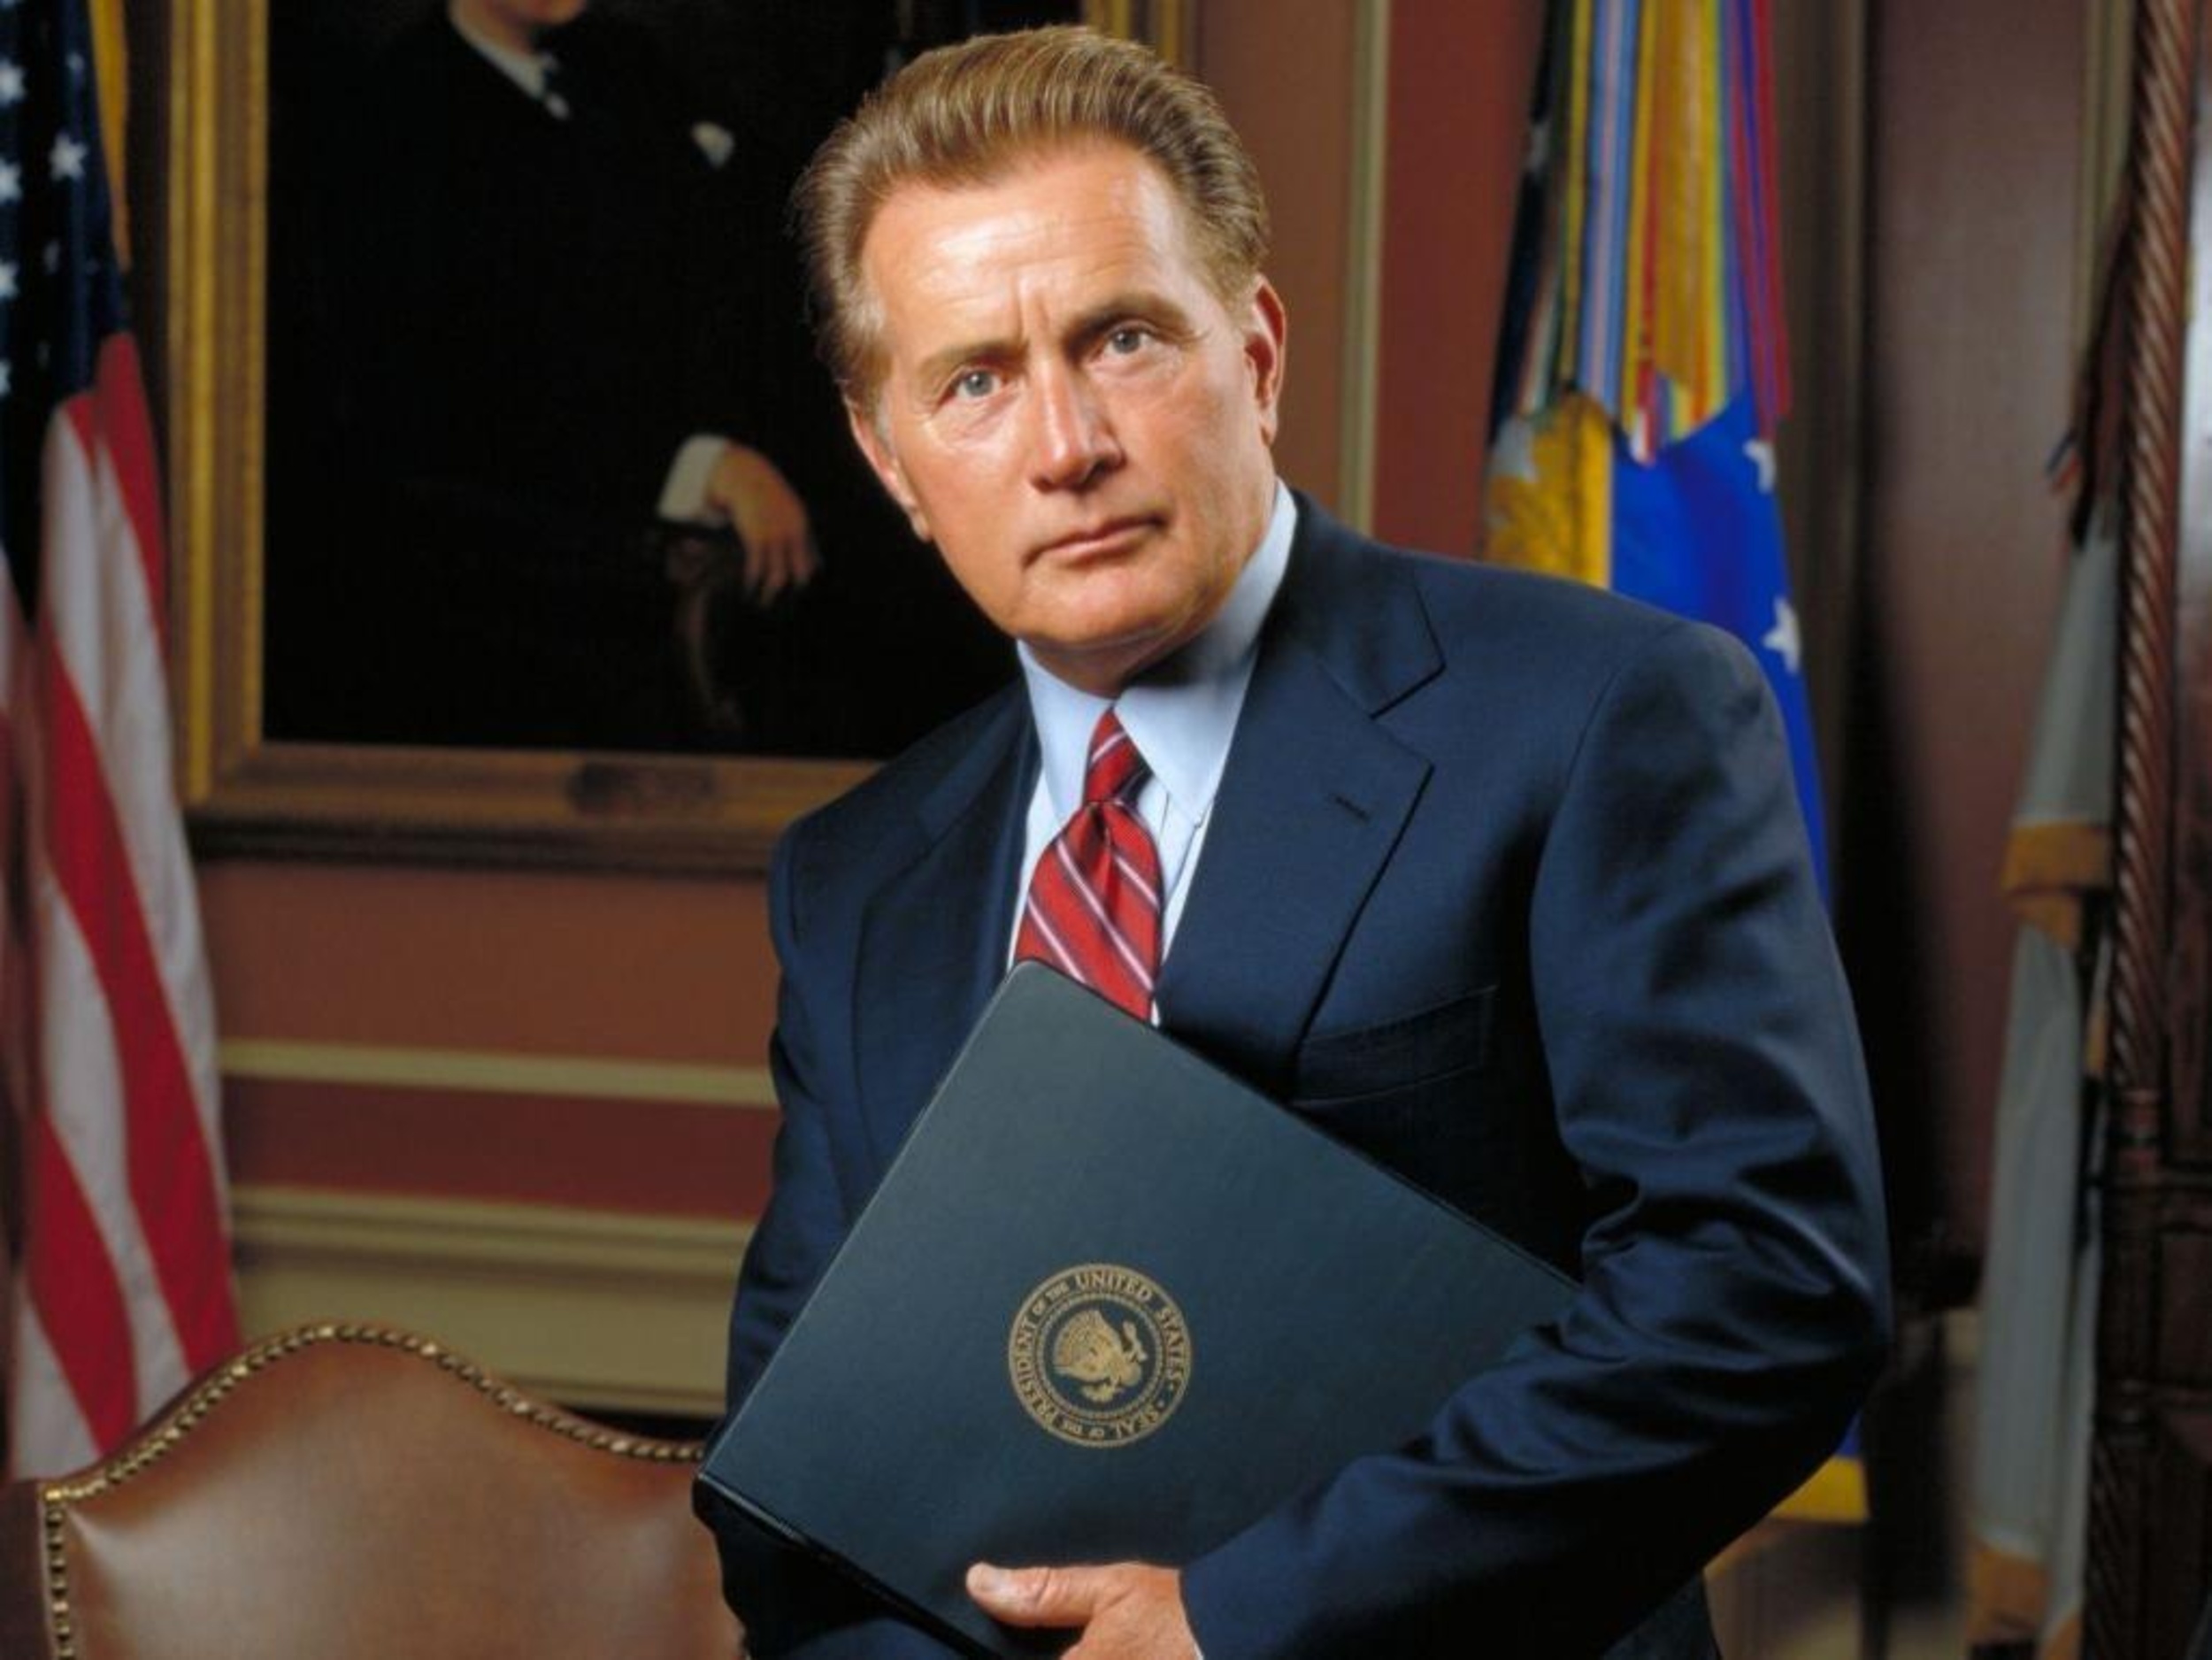 <p>Just like his son Charlie, Martin eventually moved to TV after starring in films like <em>Apocalypse Now</em>. However, Martin went with a prestige political drama as opposed to a broad sitcom. Sheen played President Bartlet on Sorkin’s <em>The West Wing</em> and would later have a supporting role on Fonda’s <em>Grace and Frankie</em>.</p><p><a href='https://www.msn.com/en-us/community/channel/vid-cj9pqbr0vn9in2b6ddcd8sfgpfq6x6utp44fssrv6mc2gtybw0us'>Follow us on MSN to see more of our exclusive entertainment content.</a></p>